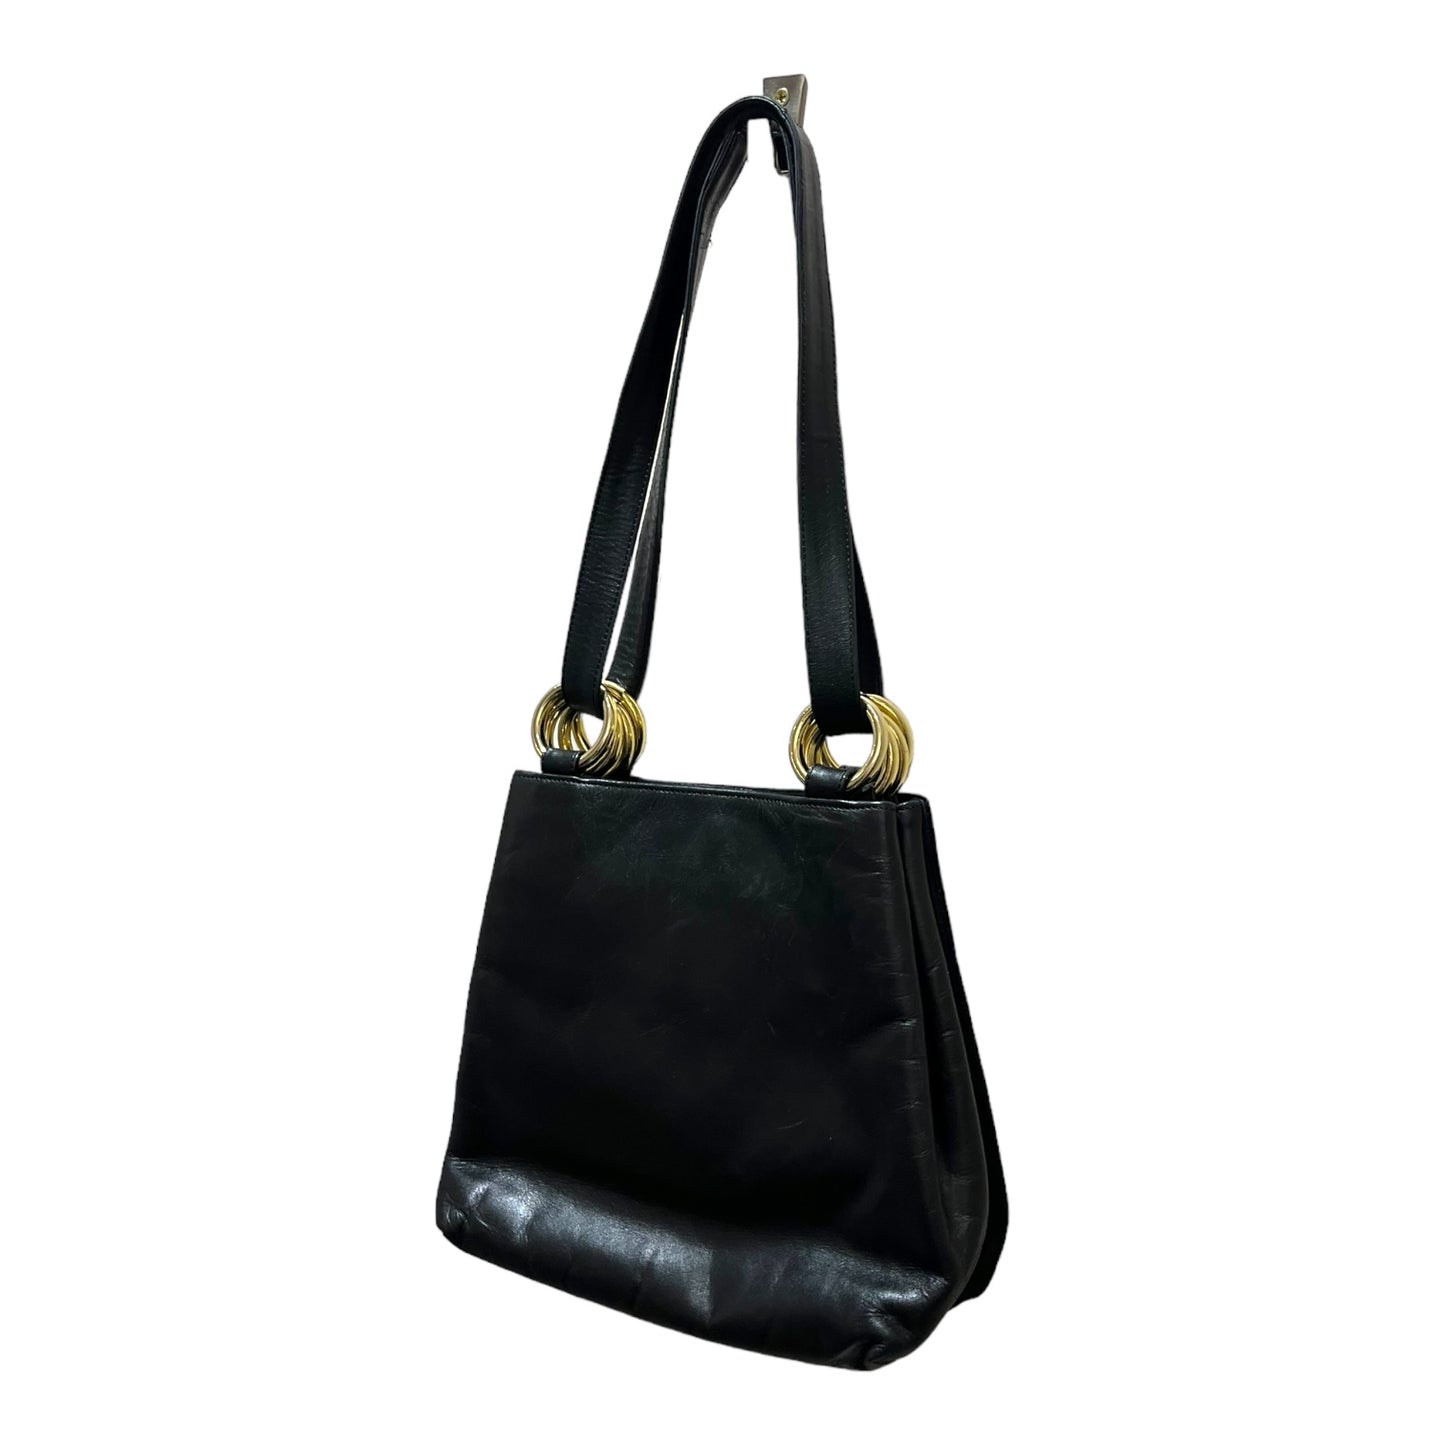 Russell & Bromley Black Leather and Suede Bag